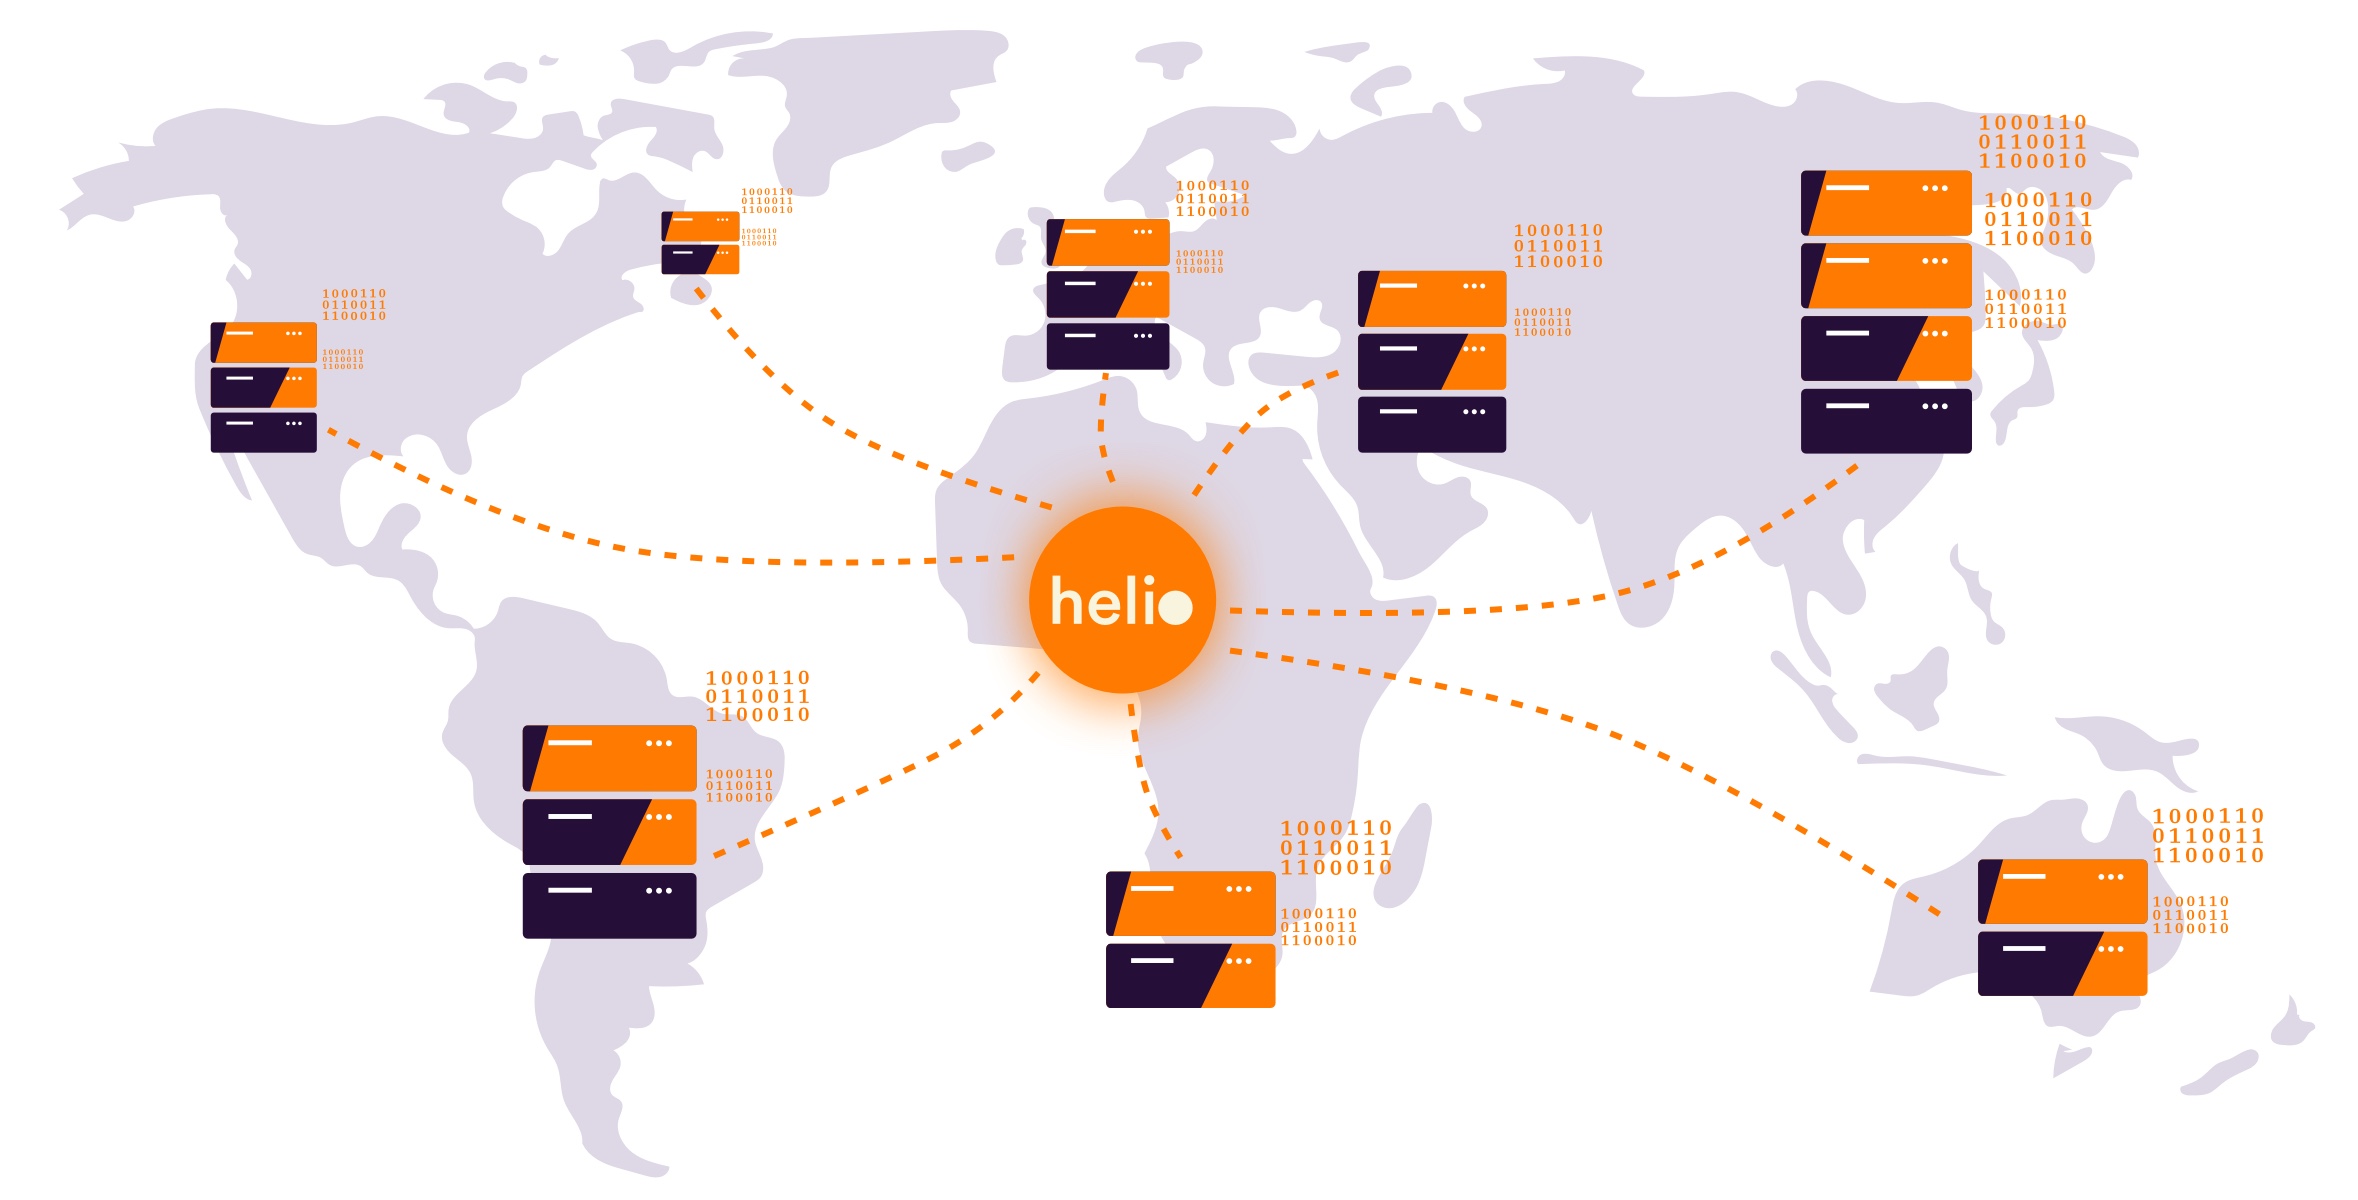 Helio connects